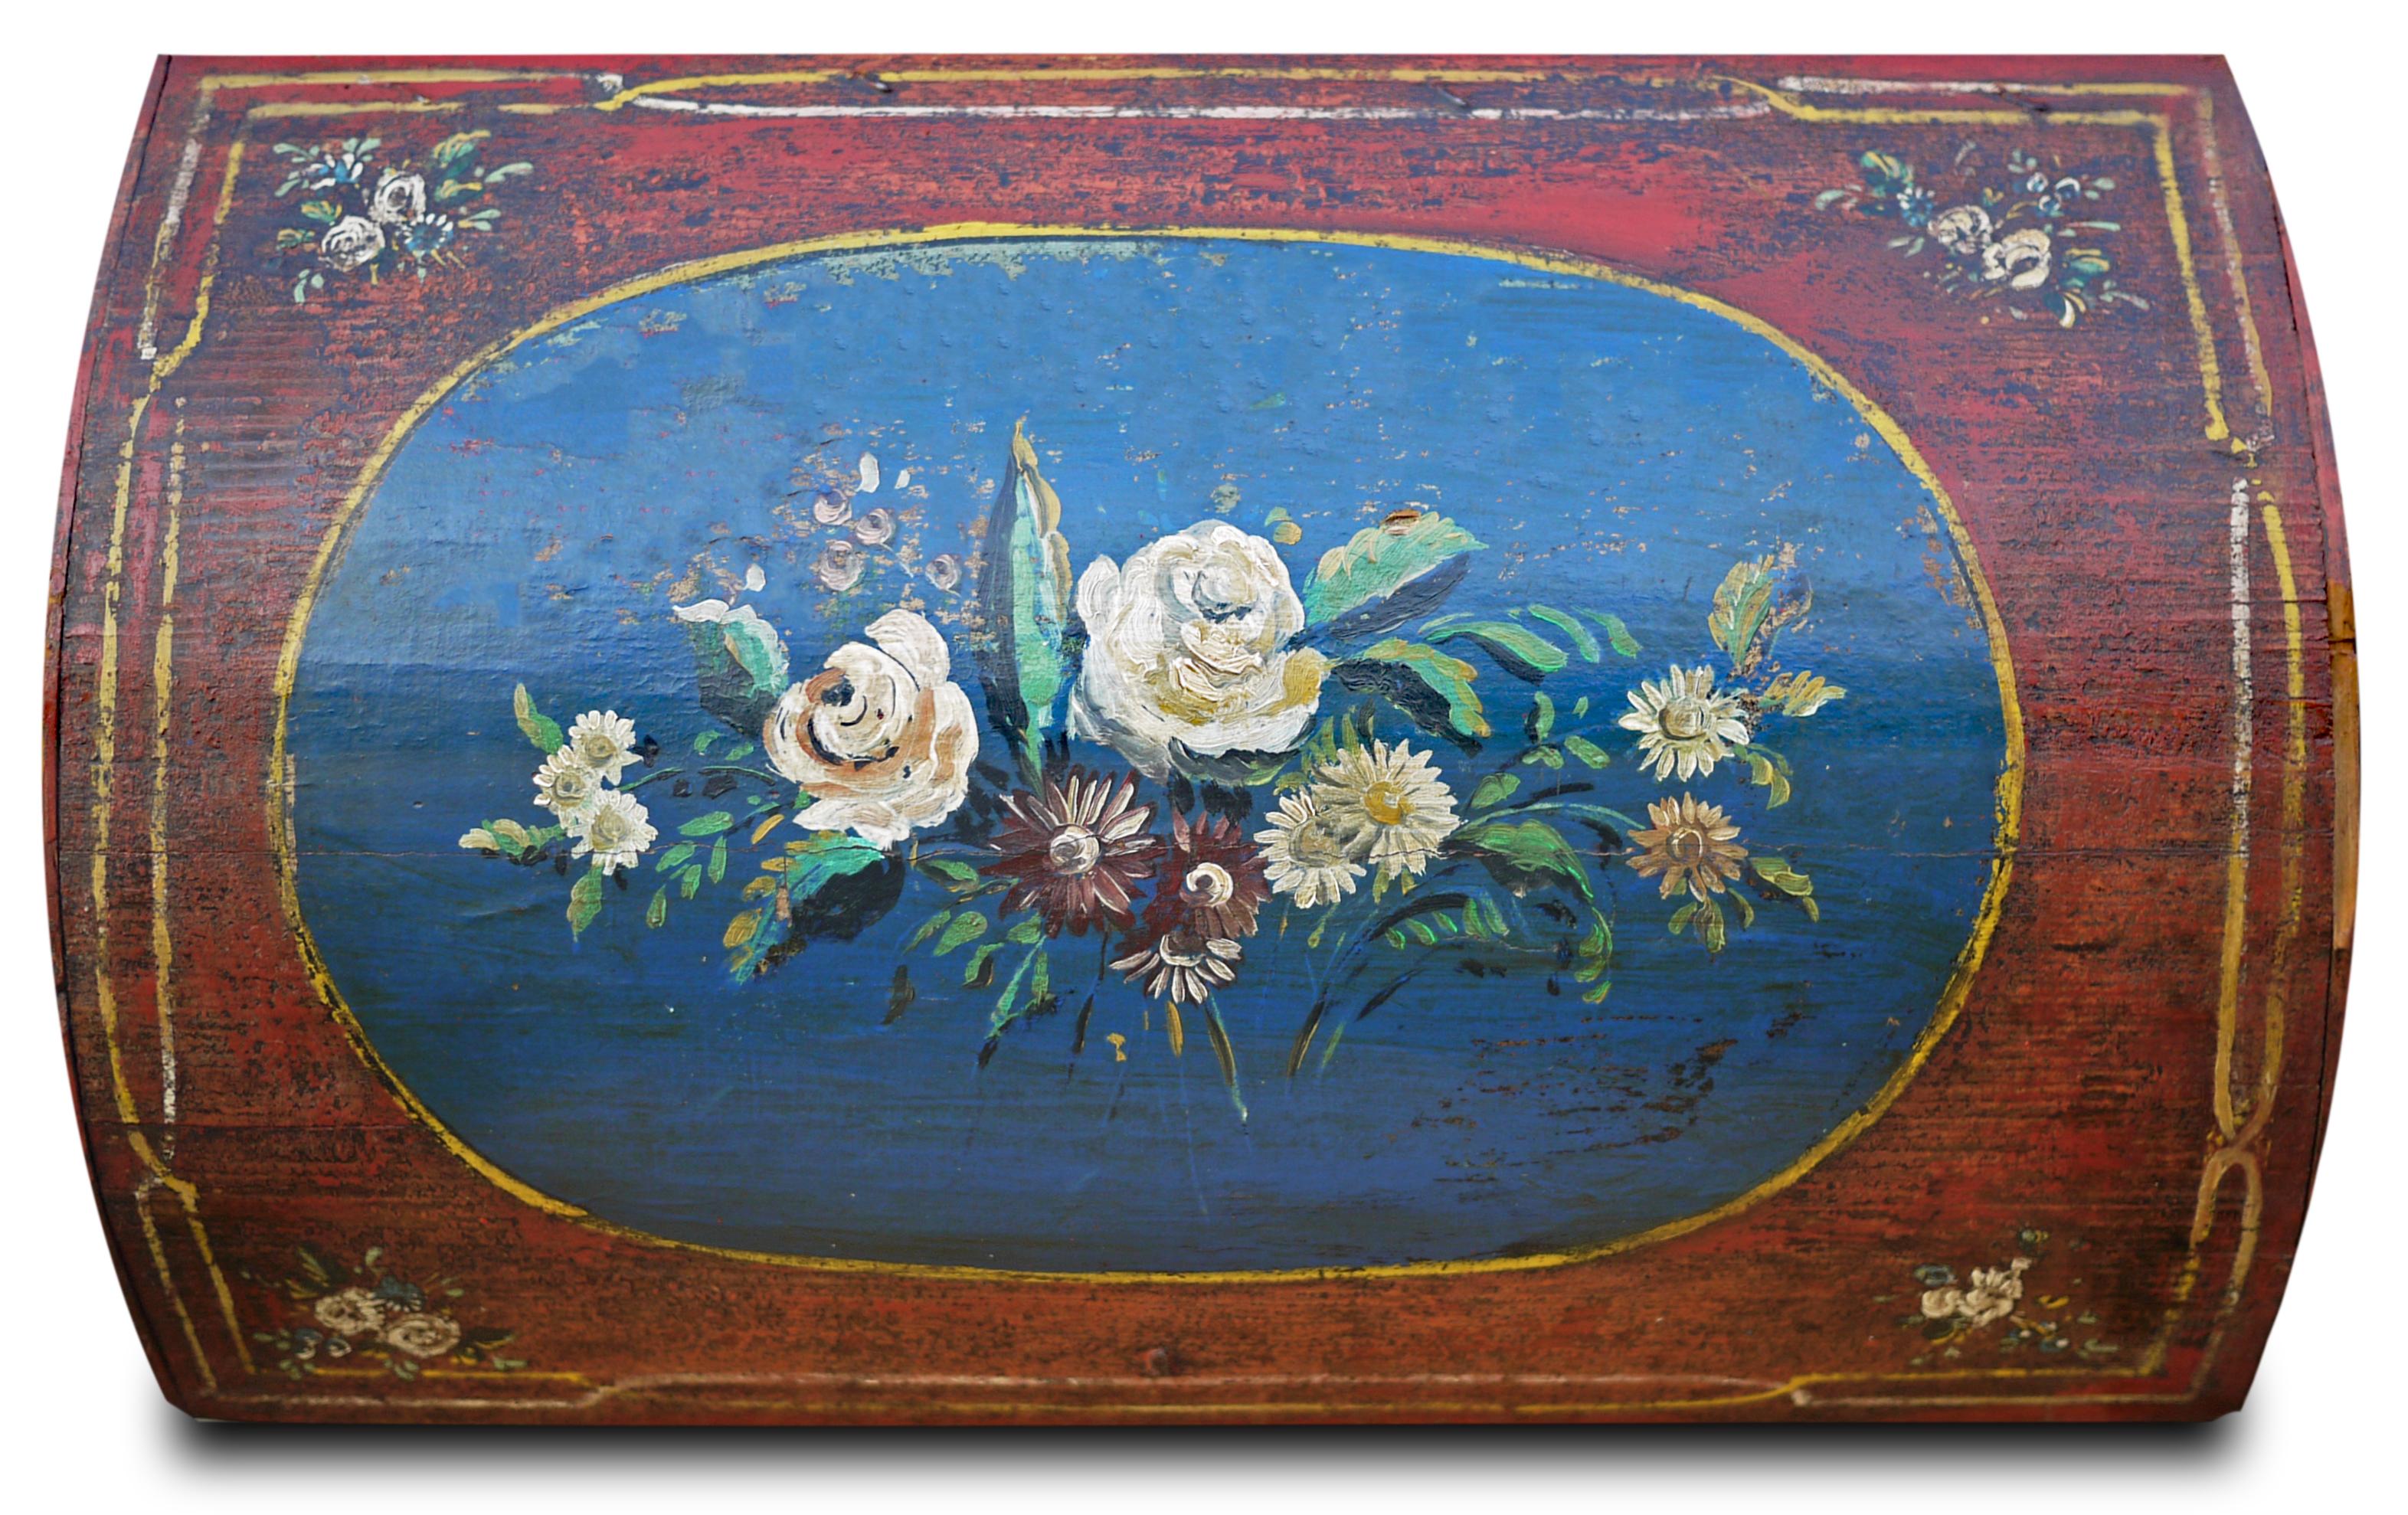 Painted table top box/case

Measures: H.30 cm, W.48 cm, D.32 cm 

Small hand-painted Tyrolean antique box, with red background. Decorated on all sides with floral motifs on a light blue background.

Tyrol, early 19th century.